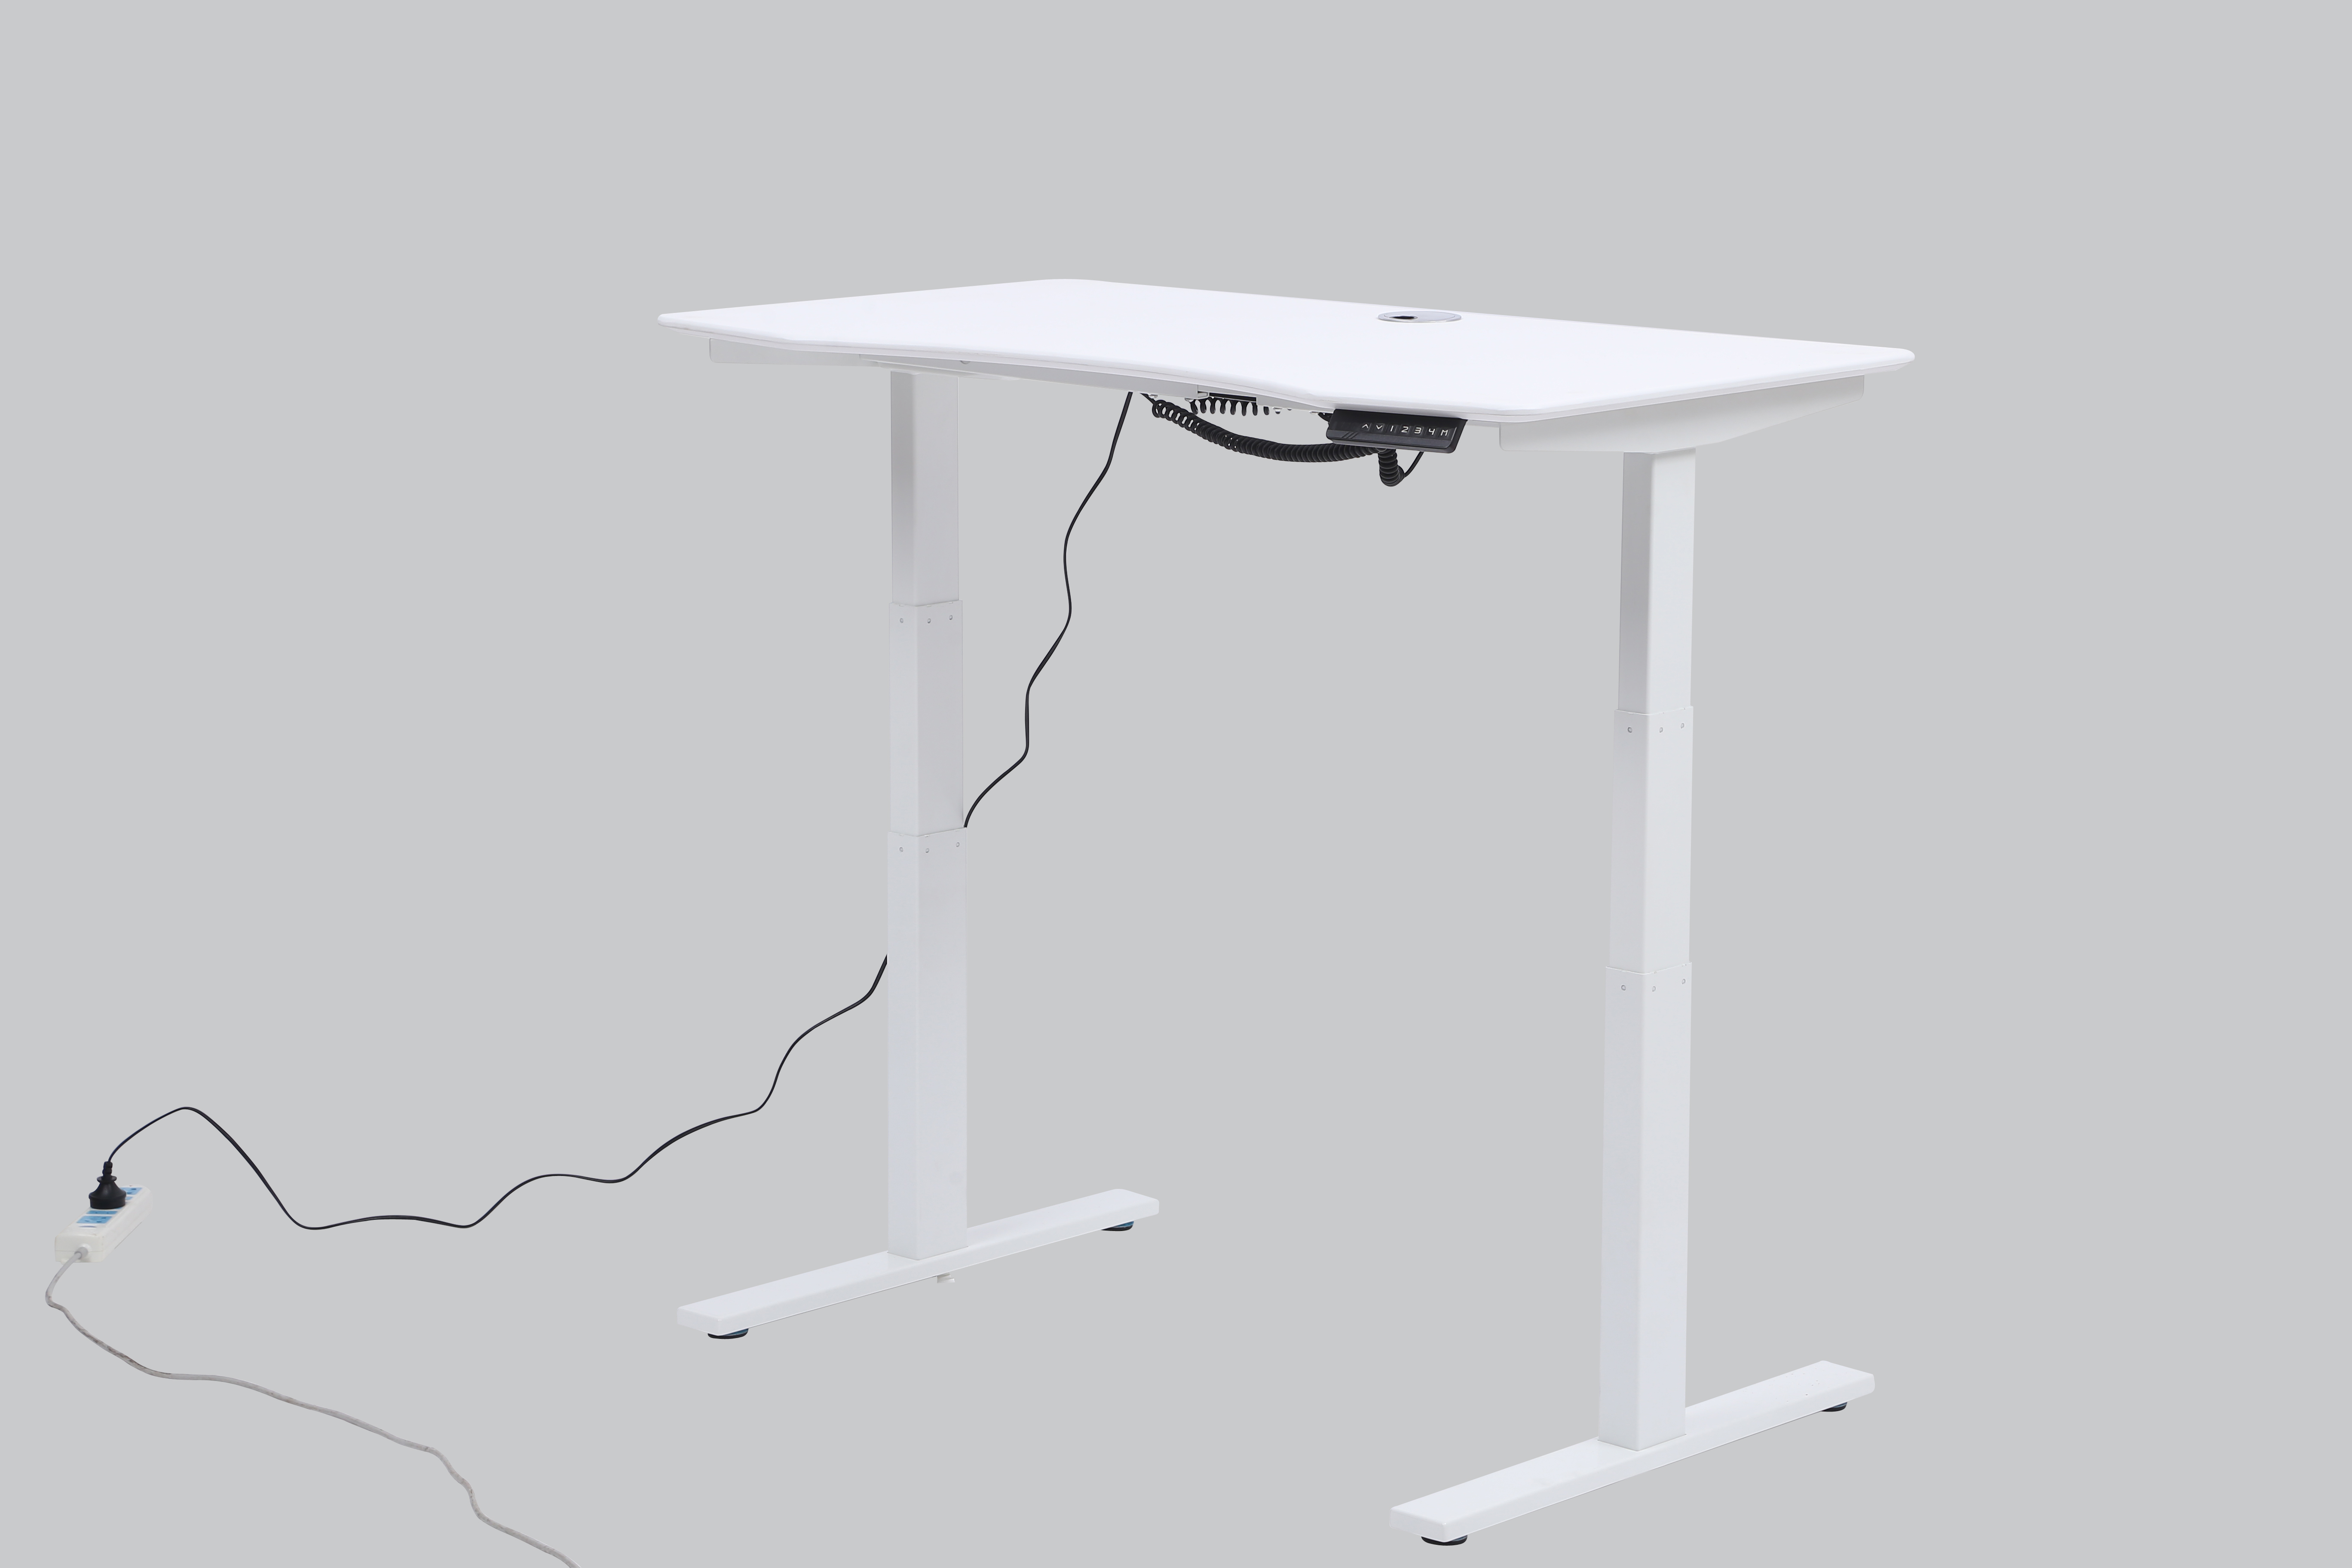 SMART LIFT DESK ASED desk with 3 lifting segments and 2 motors